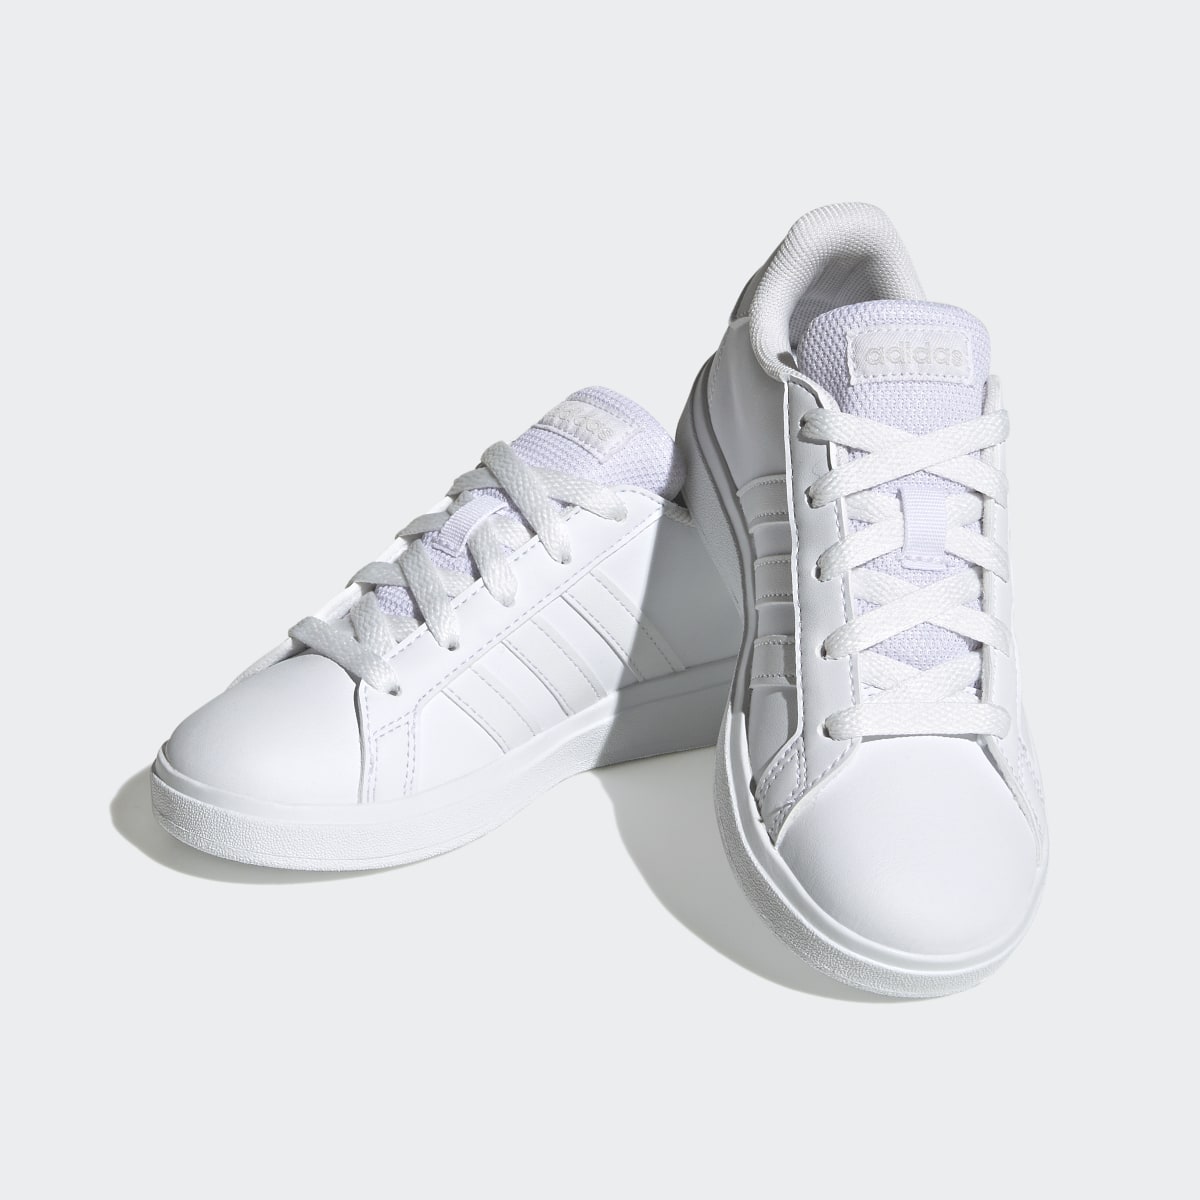 Adidas Grand Court Lifestyle Tennis Lace-Up Shoes. 5